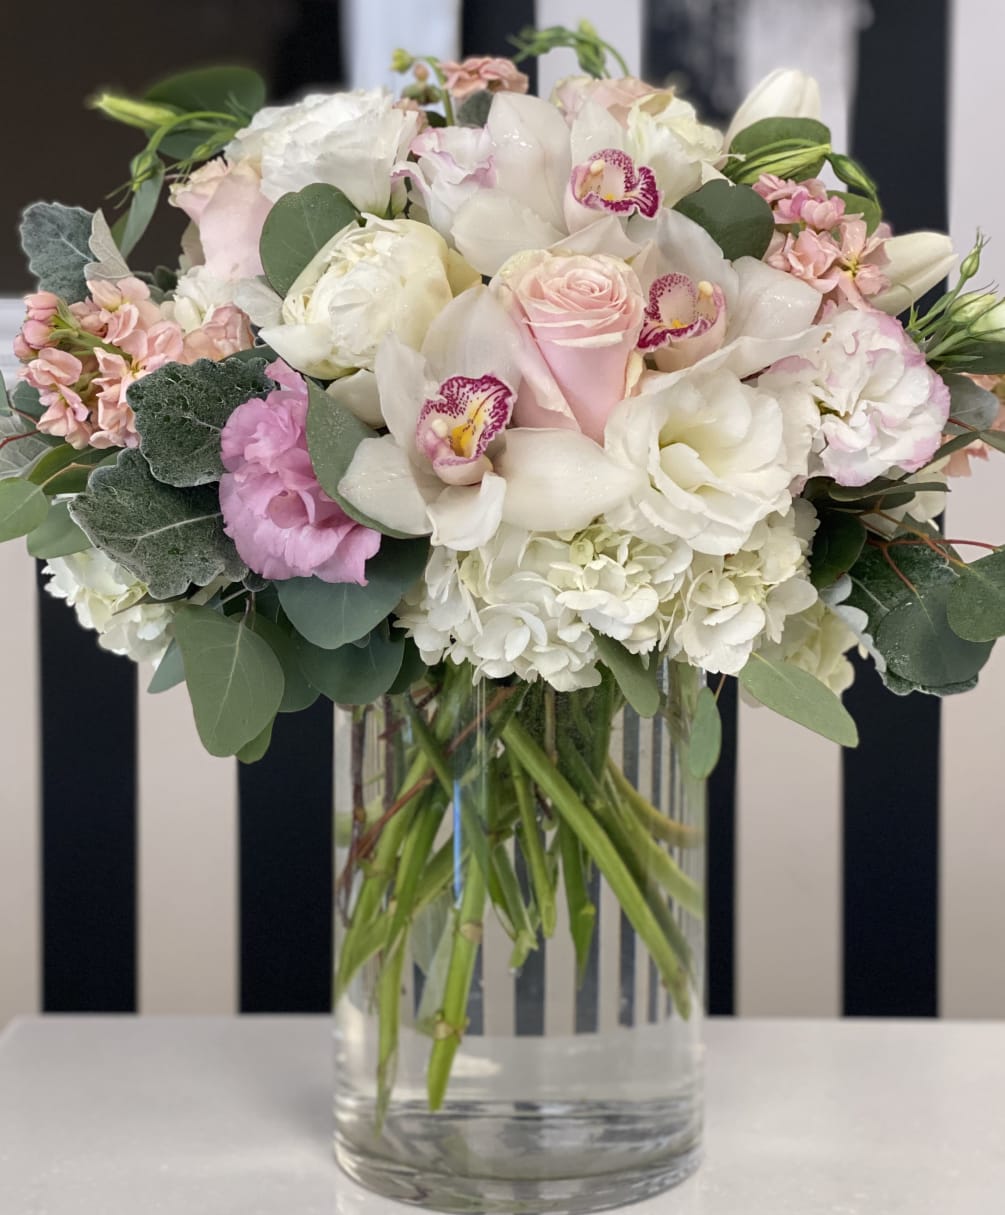 Tall size vase with soft colored blooms in pinks and whites. 